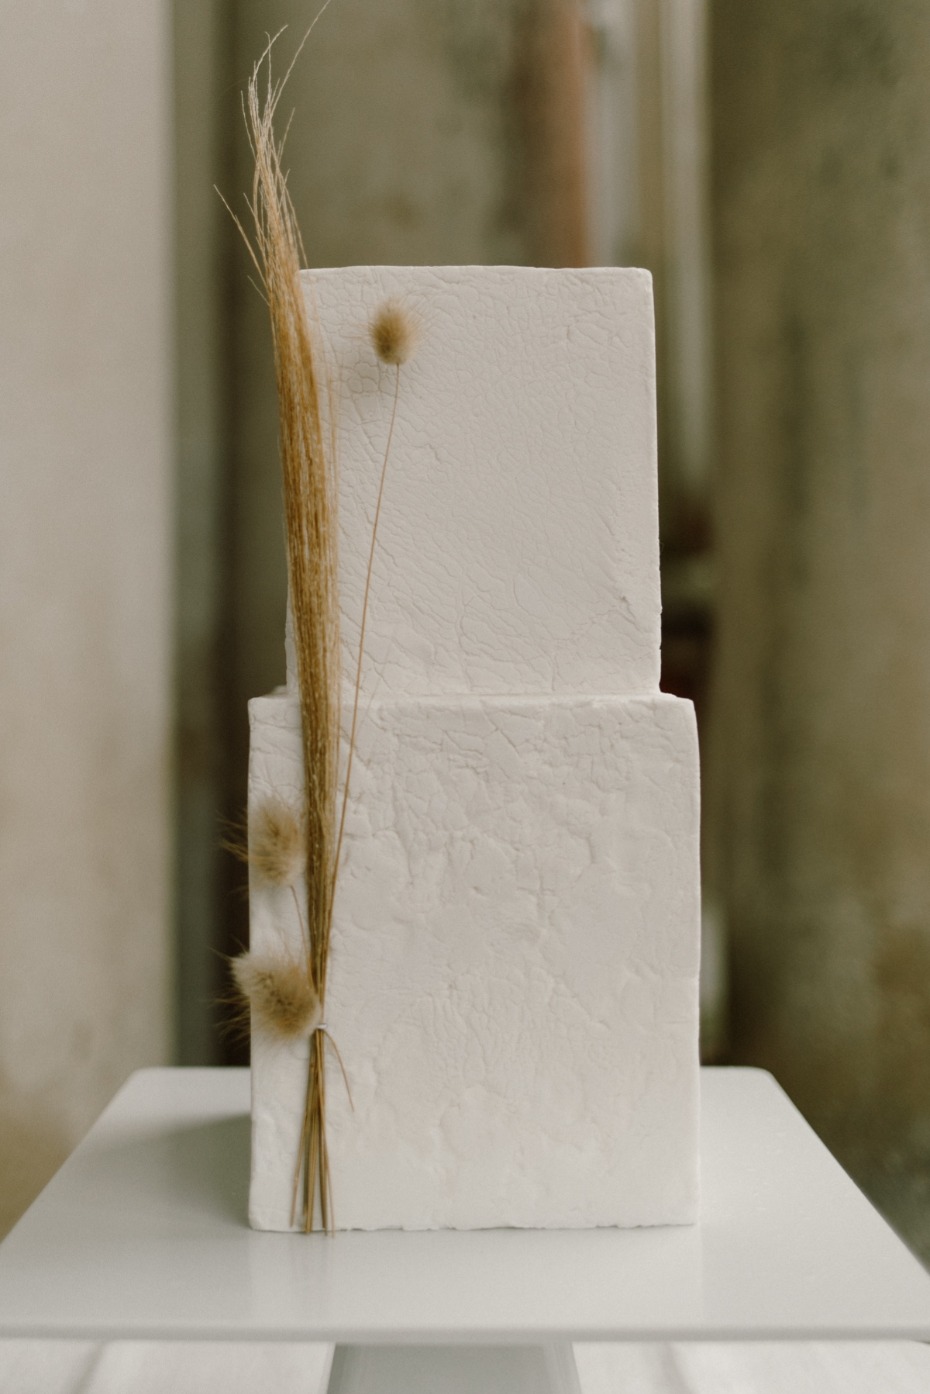 10 White Wedding Cakes That Look More Like Art